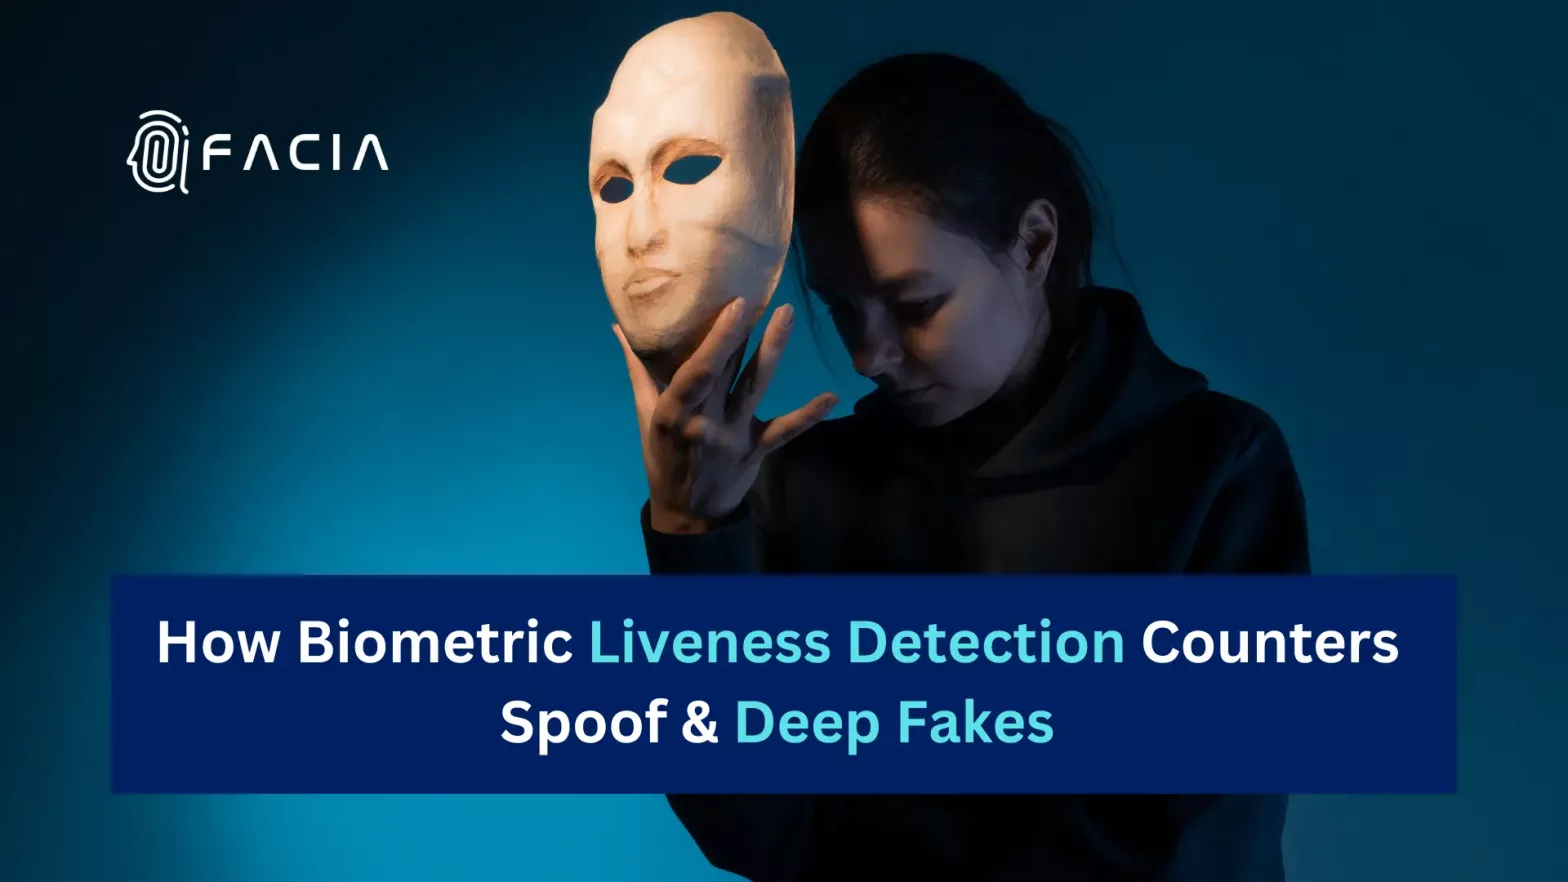 Facia's Liveness Detection: Prevents spoof attacks and deep fakes through advanced 3d liveness checks in facial recognition systems.